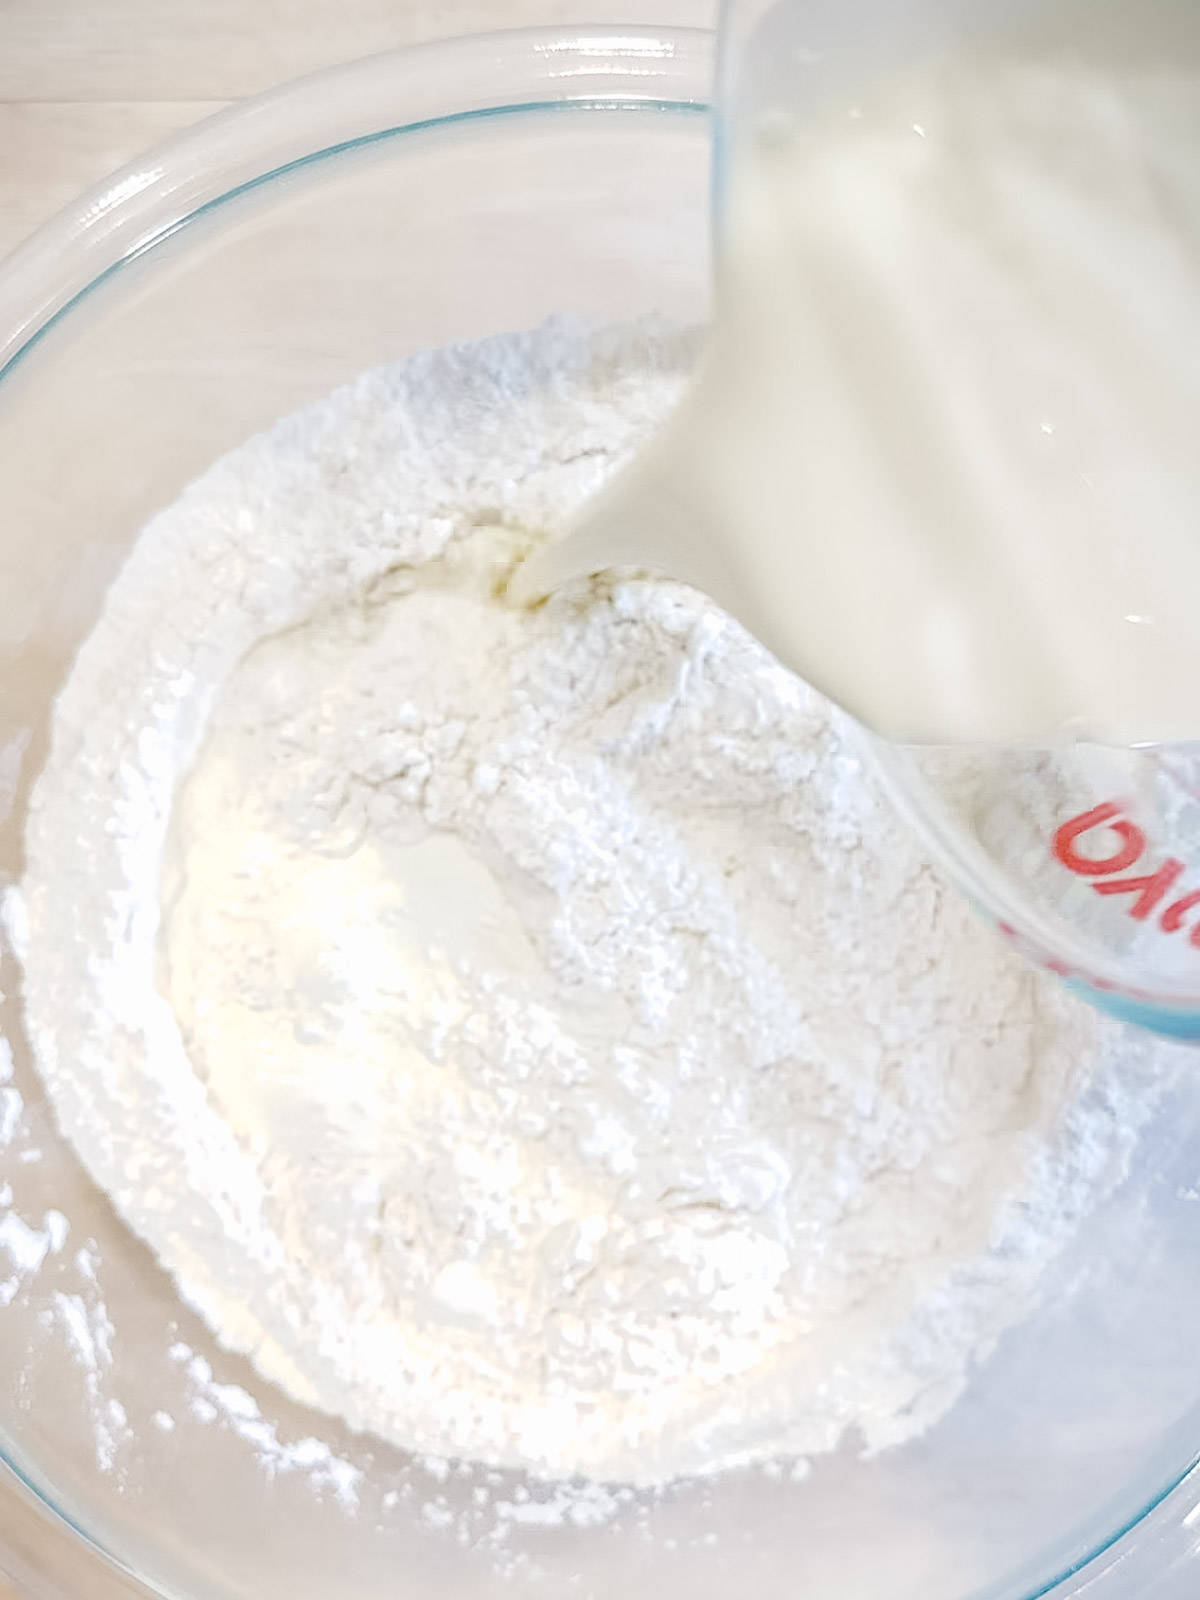 Pouring heavy cream into dry ingredients to make cream biscuits.